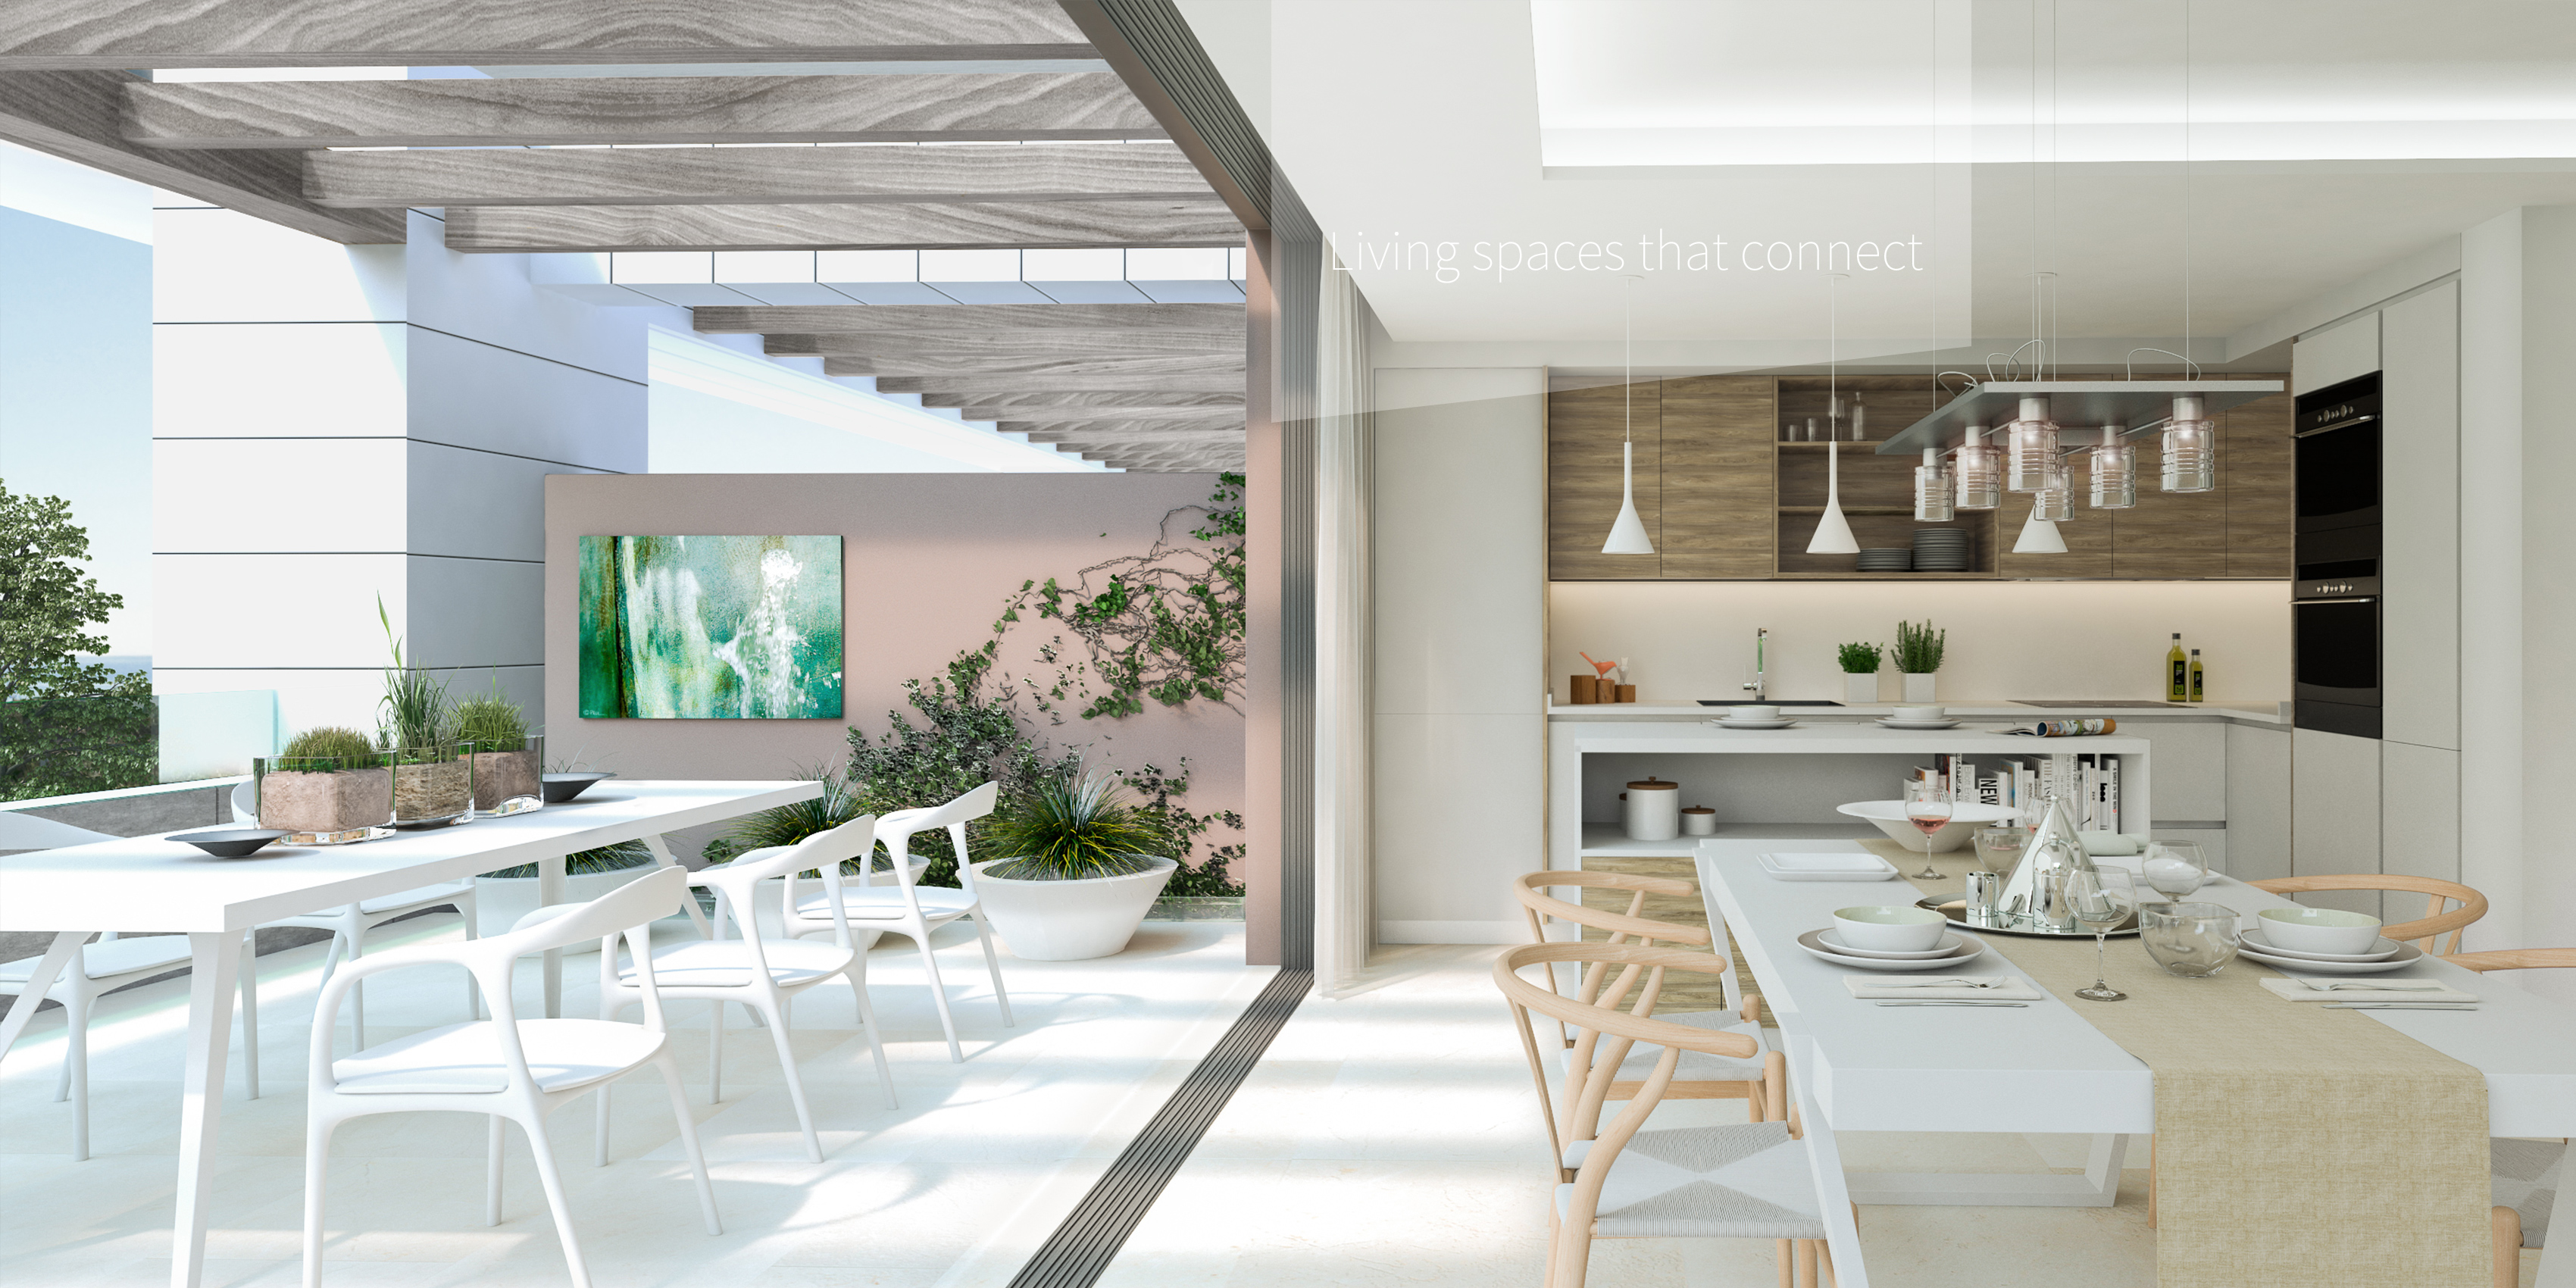 Living spaces that connect